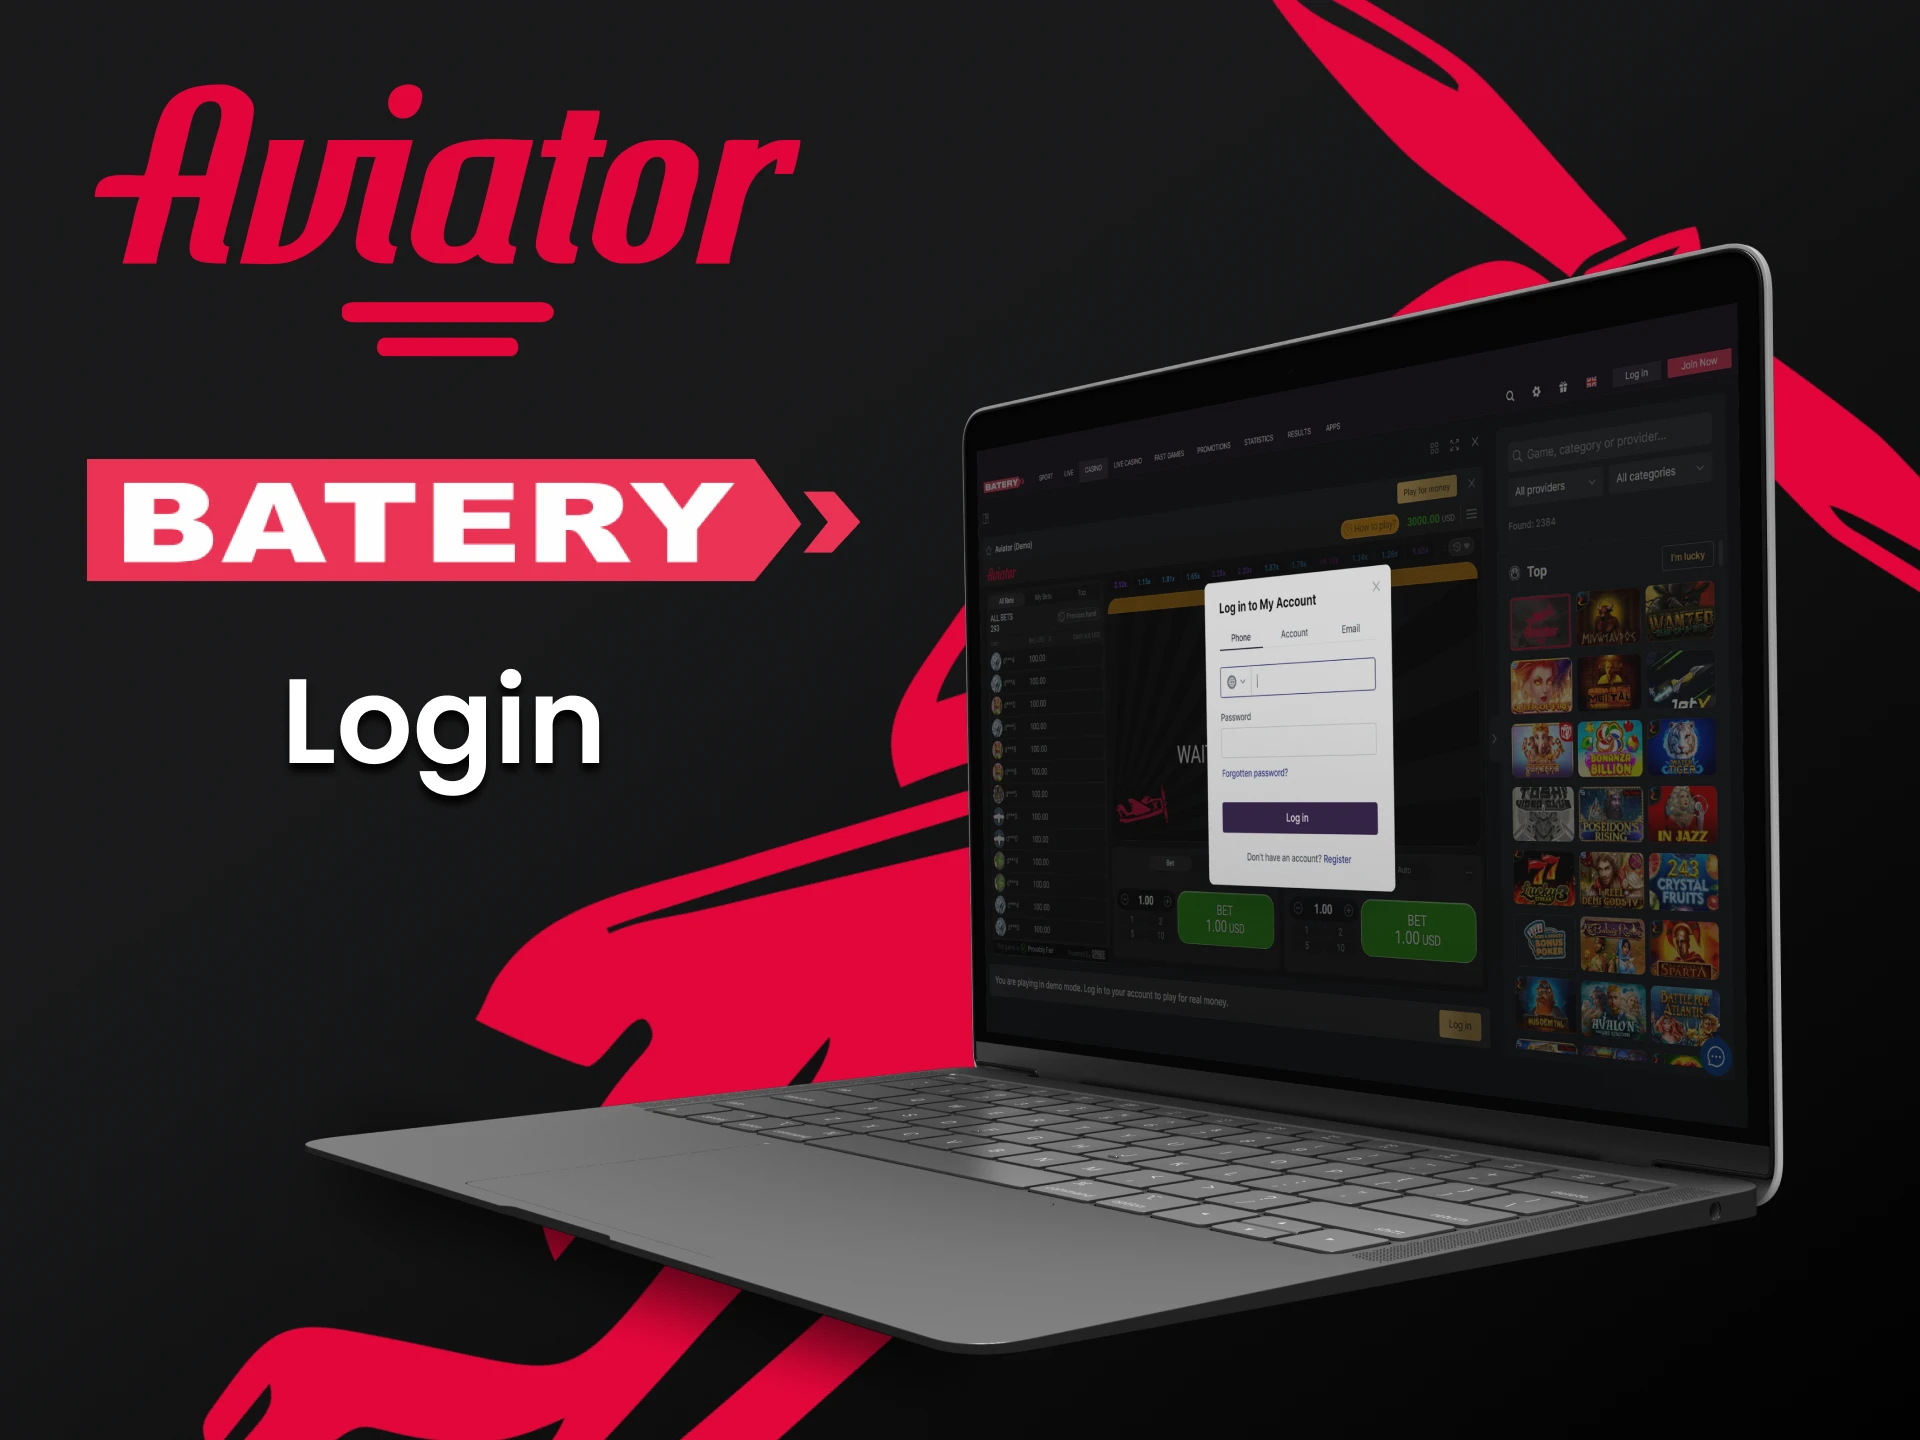 Sign in to your Batery account to play Aviator.